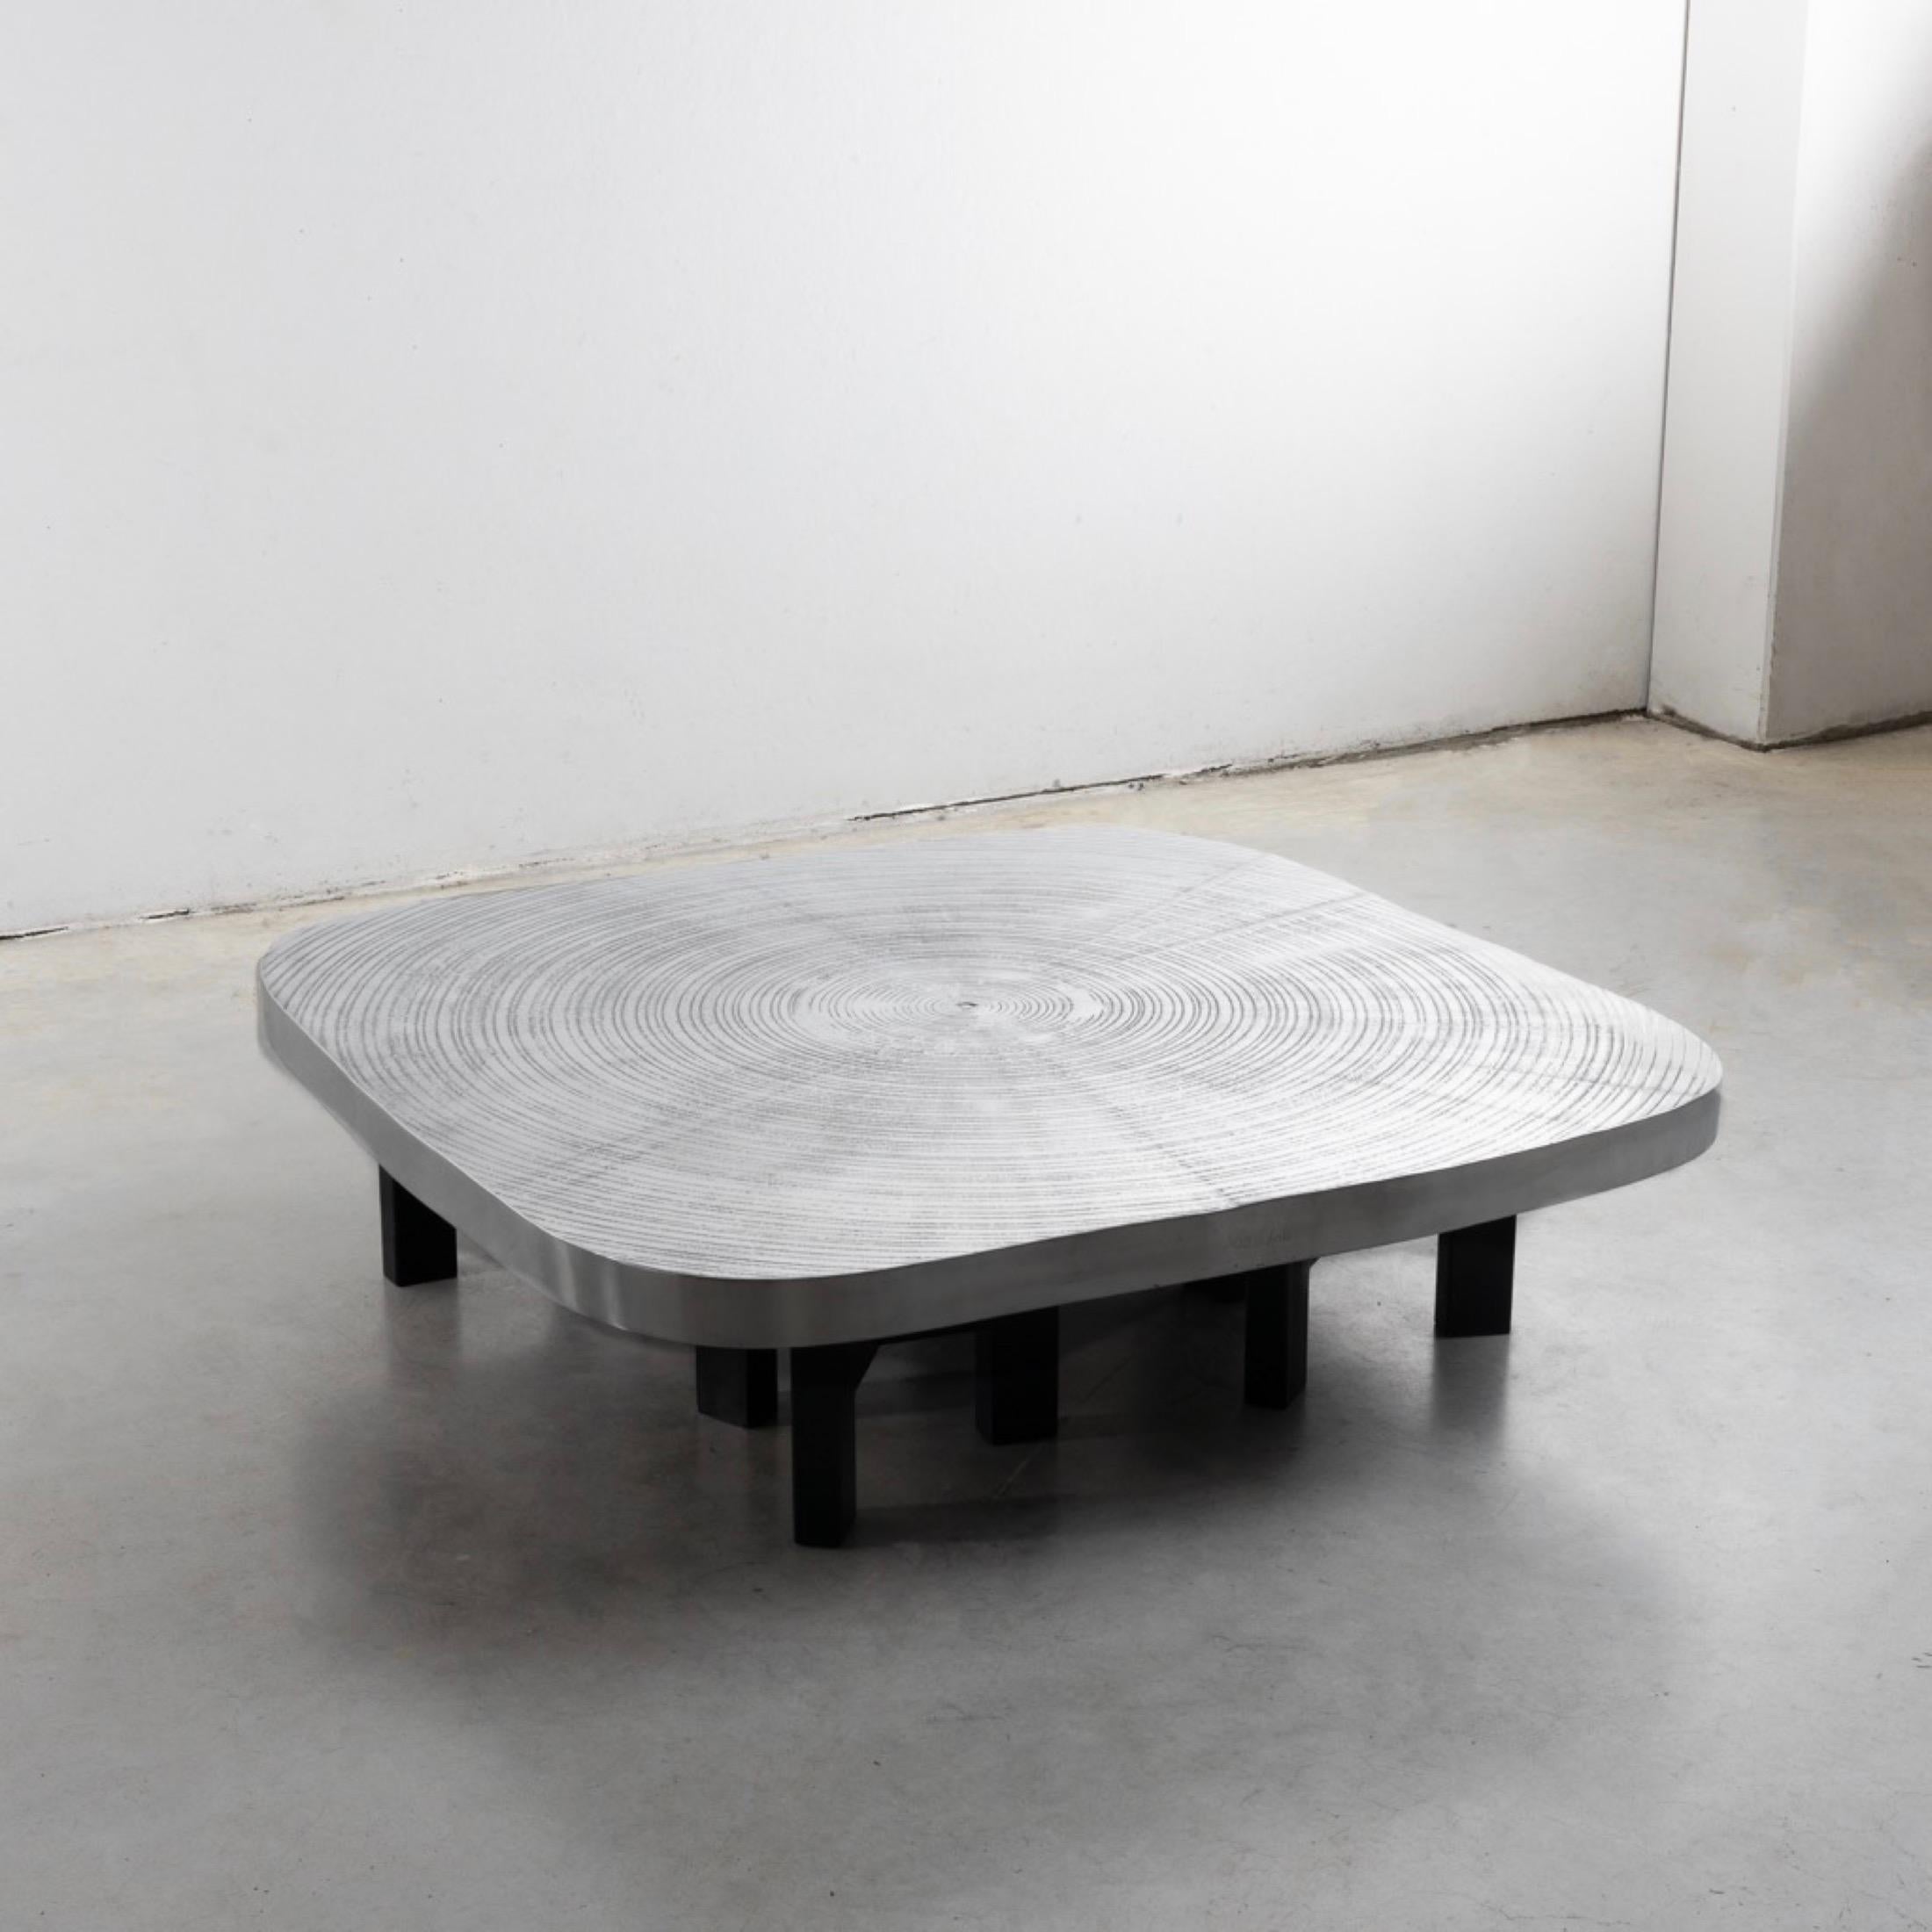 Large square “Goutte d’eau” coffee table with rounded corners.
The top rests on four tripod legs in black painted steel.
The model is named by the artist “Goutte d’eau” because it represents the impact of a drop of water crashing on a surface.
An